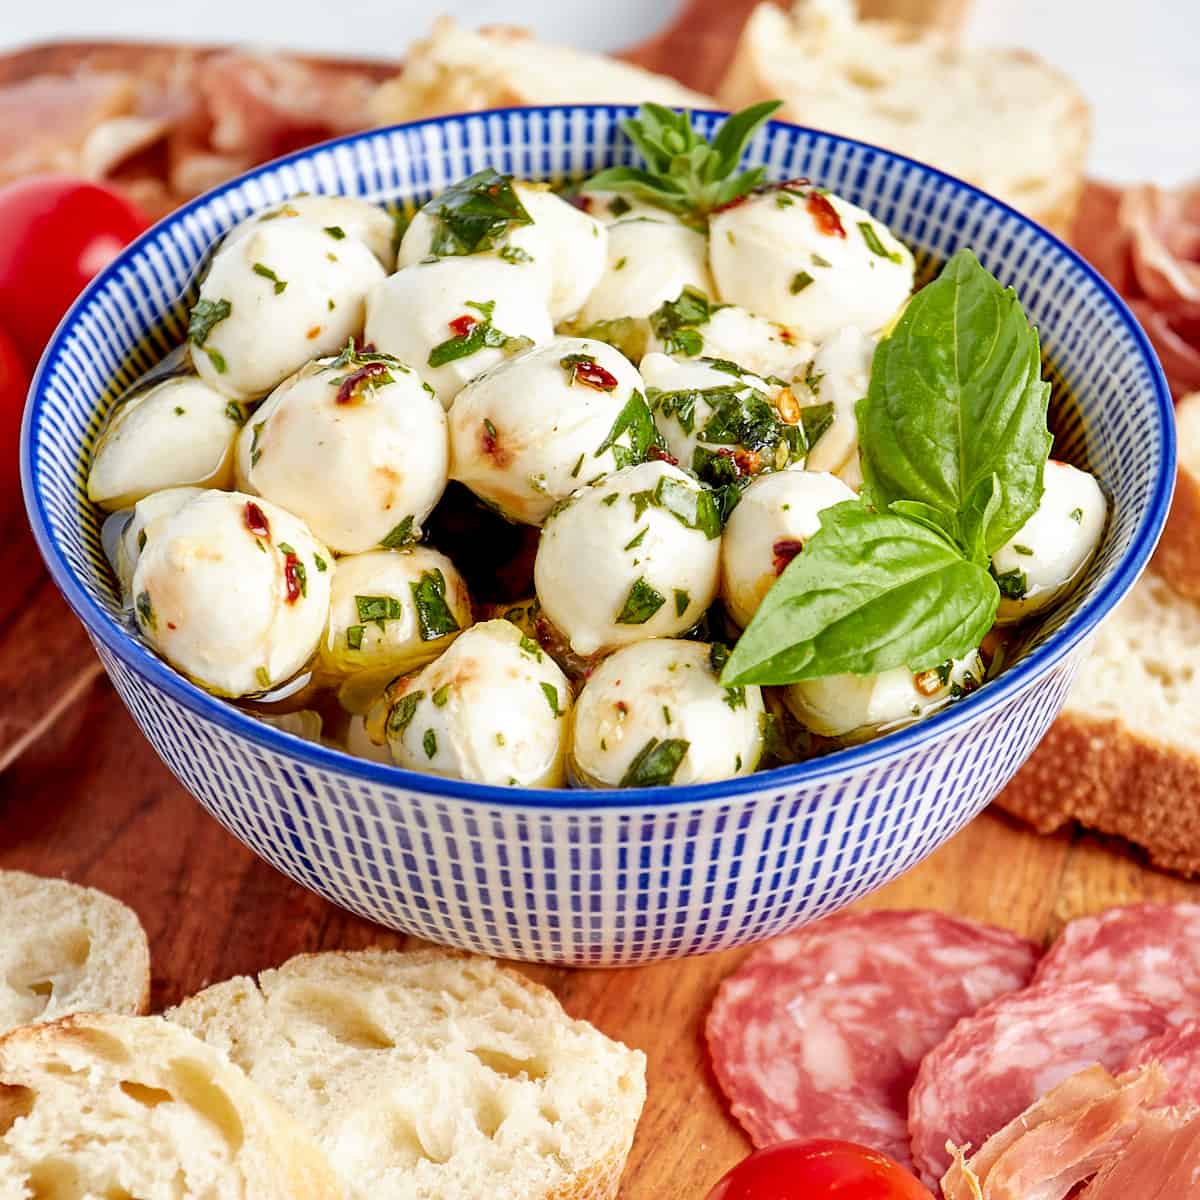 marinated mozzarella balls in a bowl next to bread, cured meat, and tomatoes